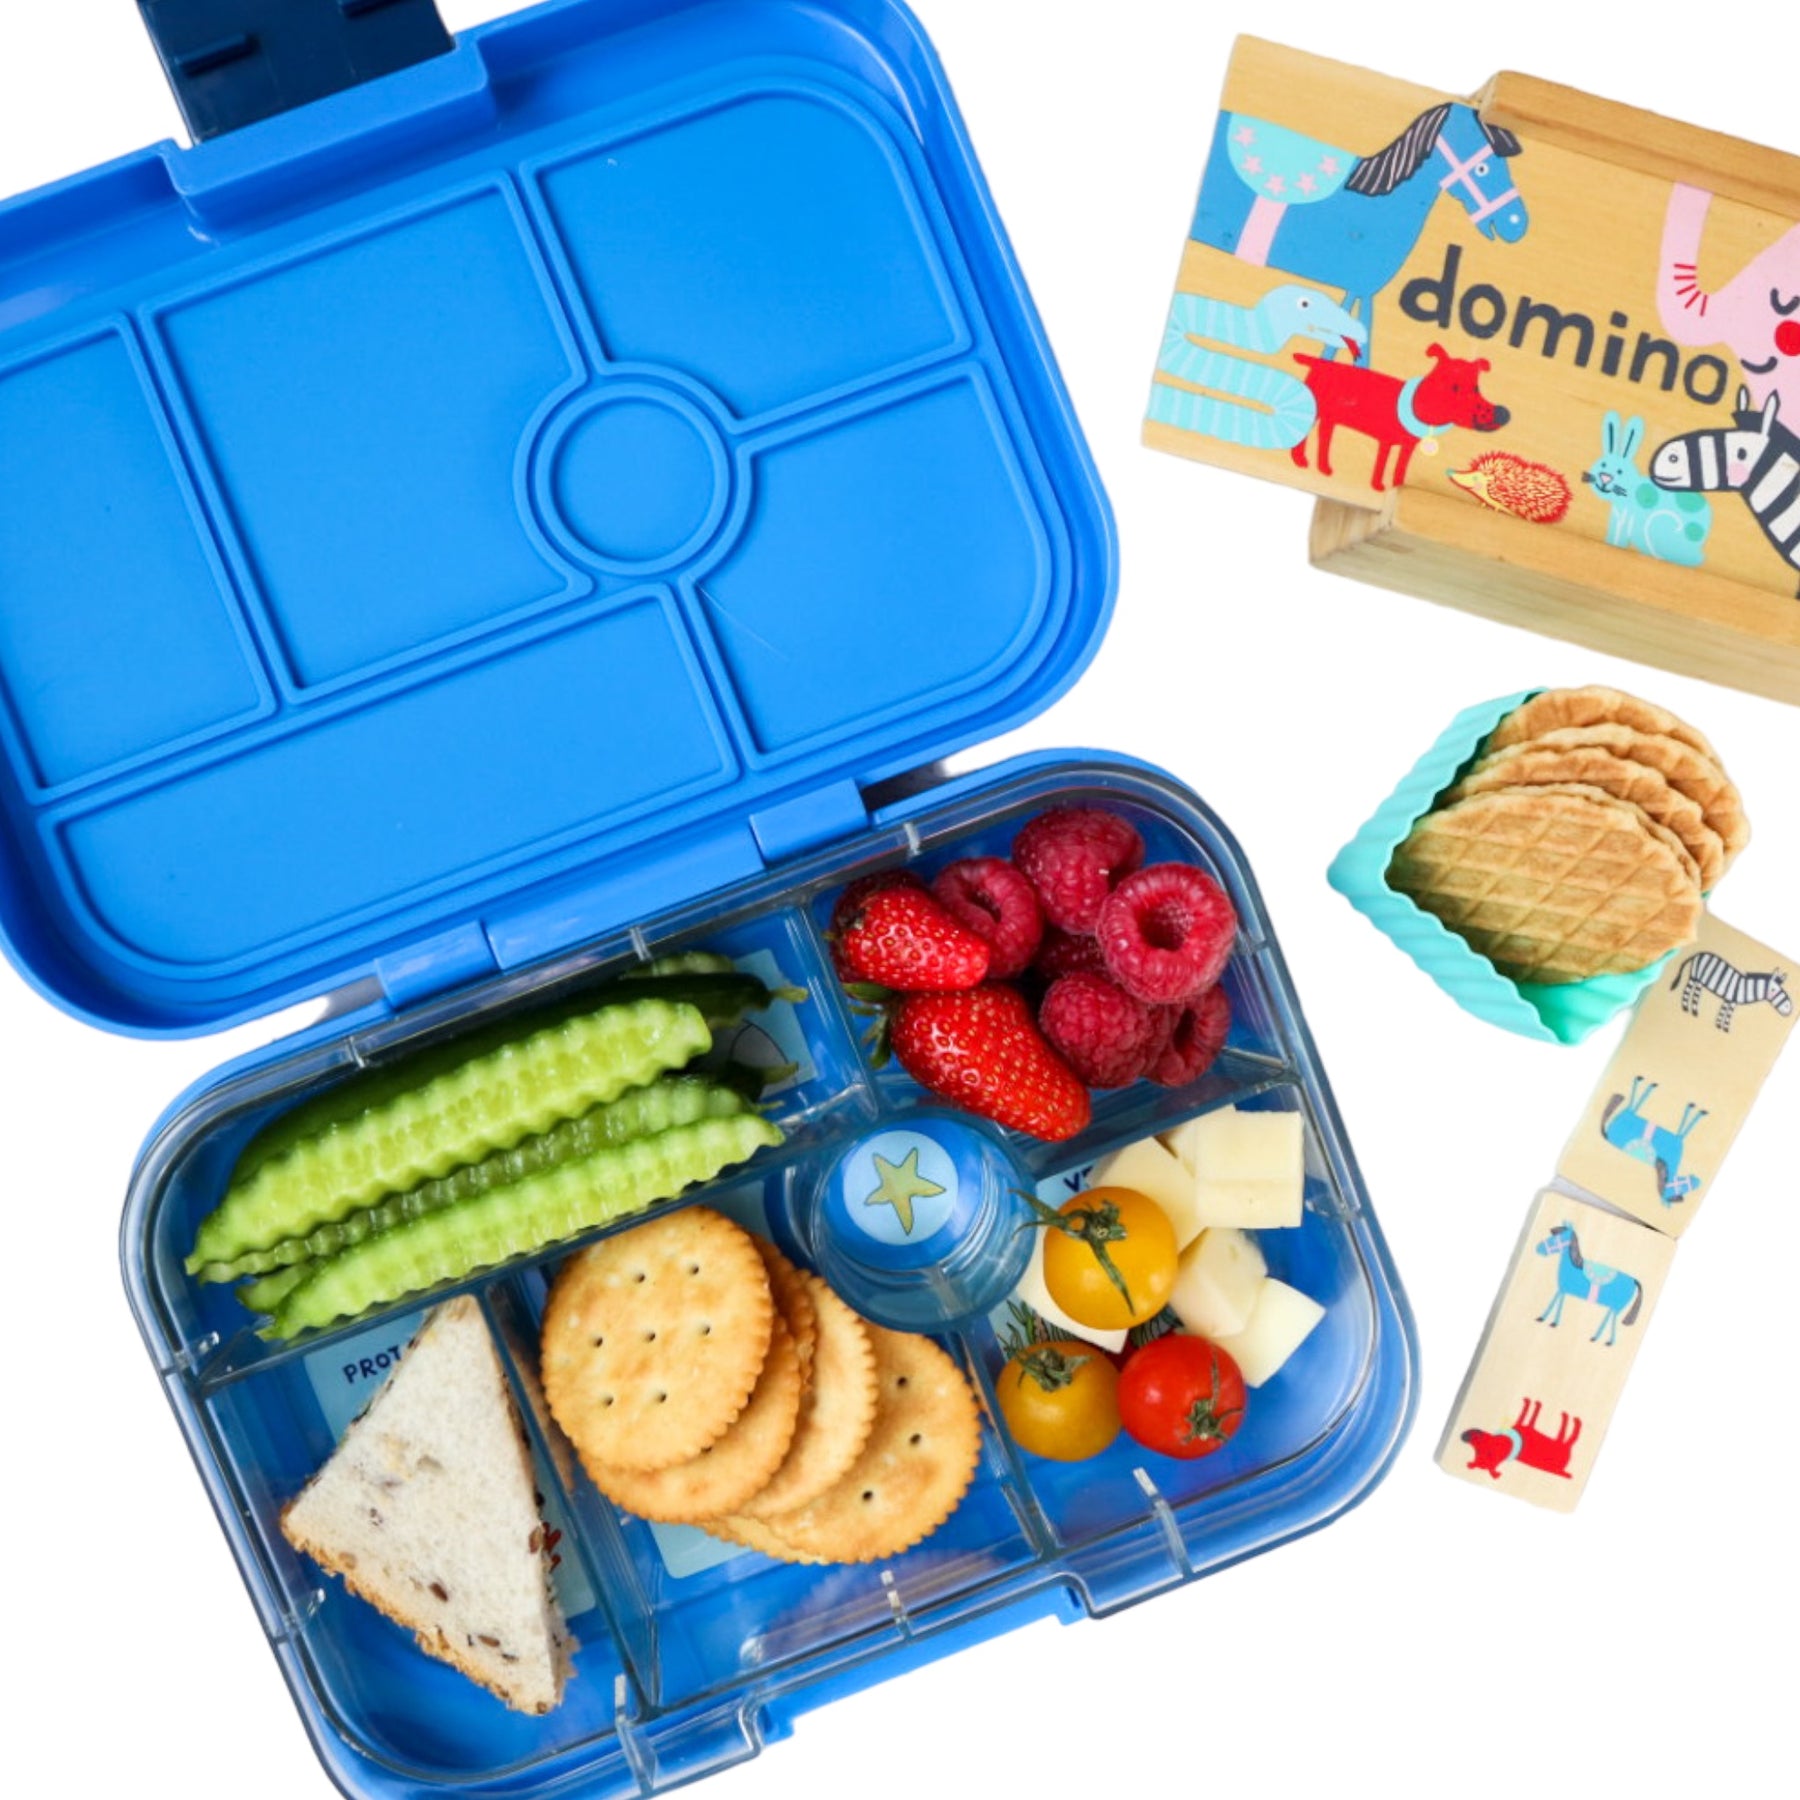 Pack Your April Lunches in Style with Yumbox Bento Boxes